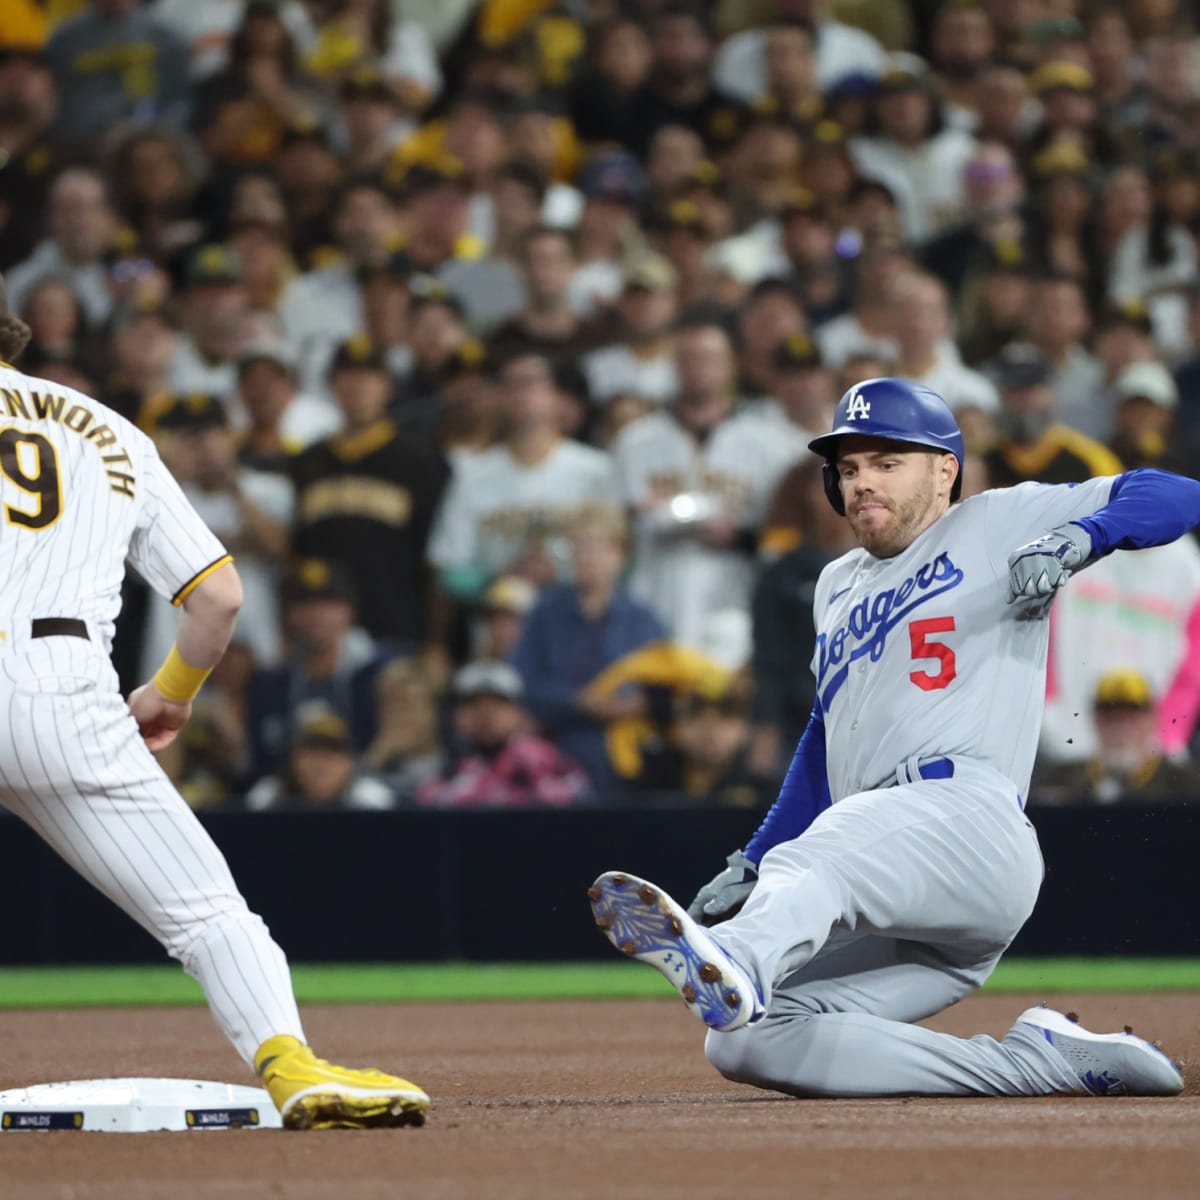 Injury-plagued Dodgers keeping close in bid to repeat title